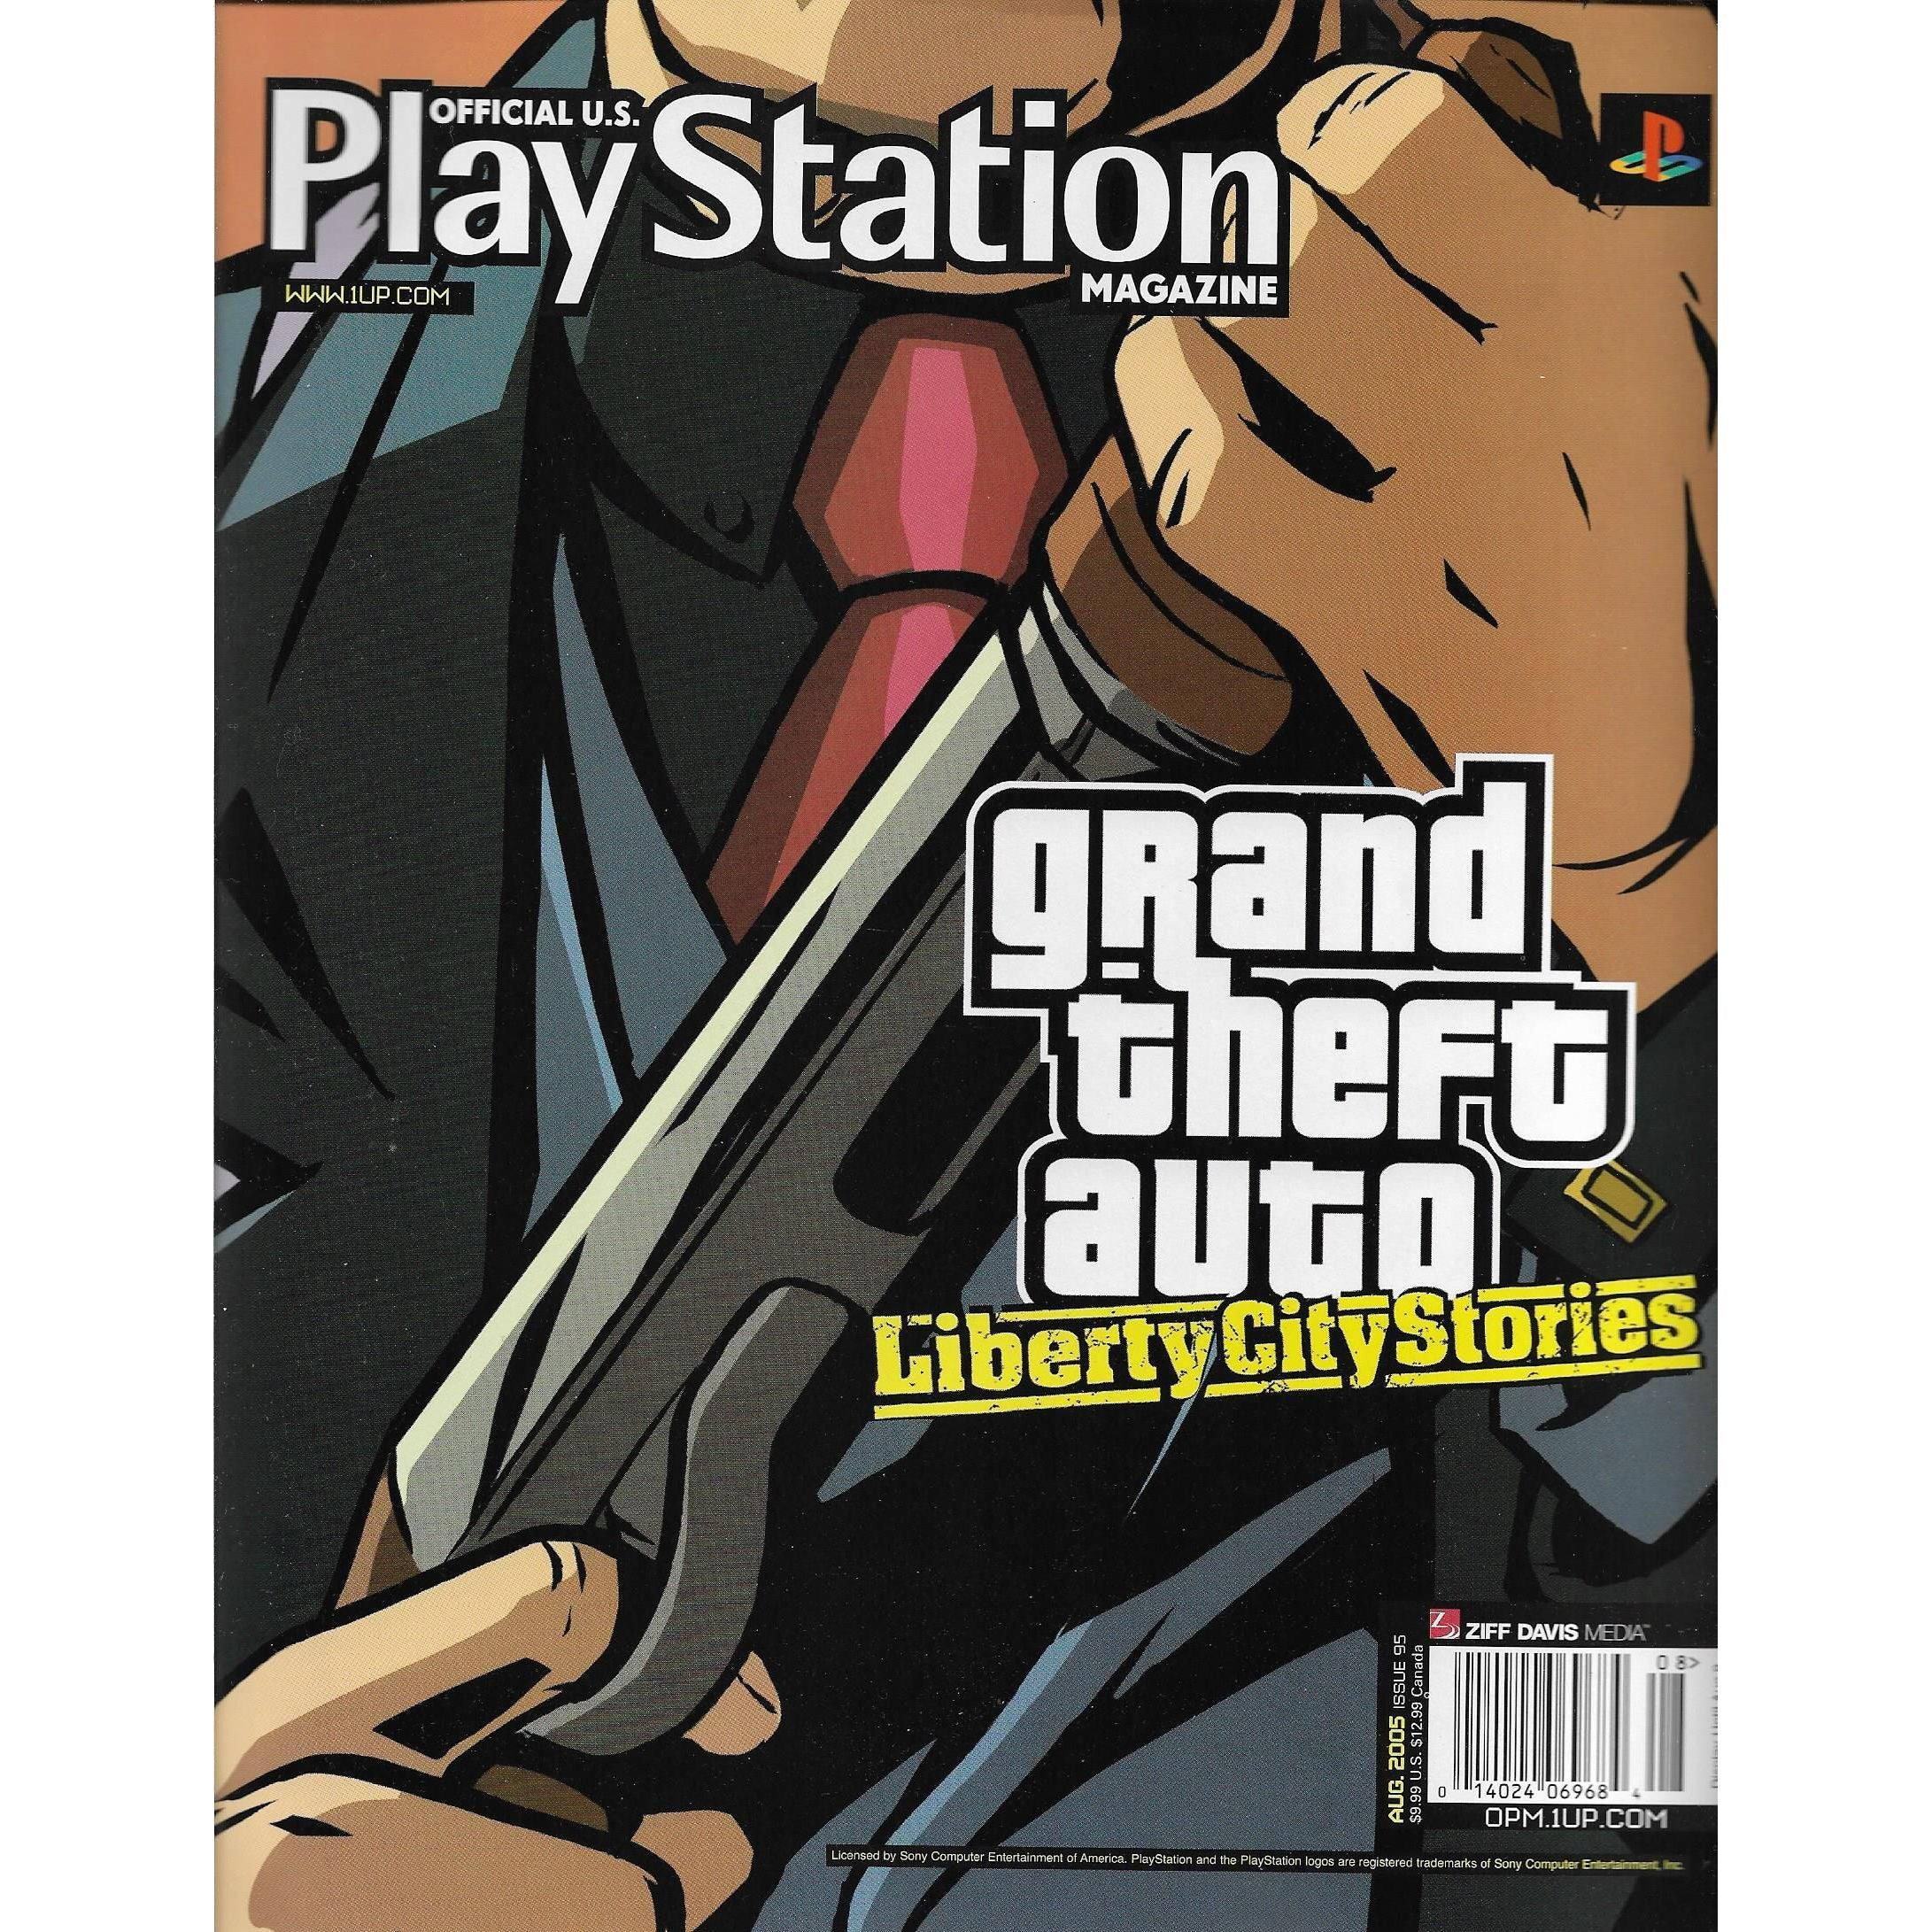 Official PlayStation Magazine - Grand Theft Auto Liberty City Stories - August 2005 Issue 95